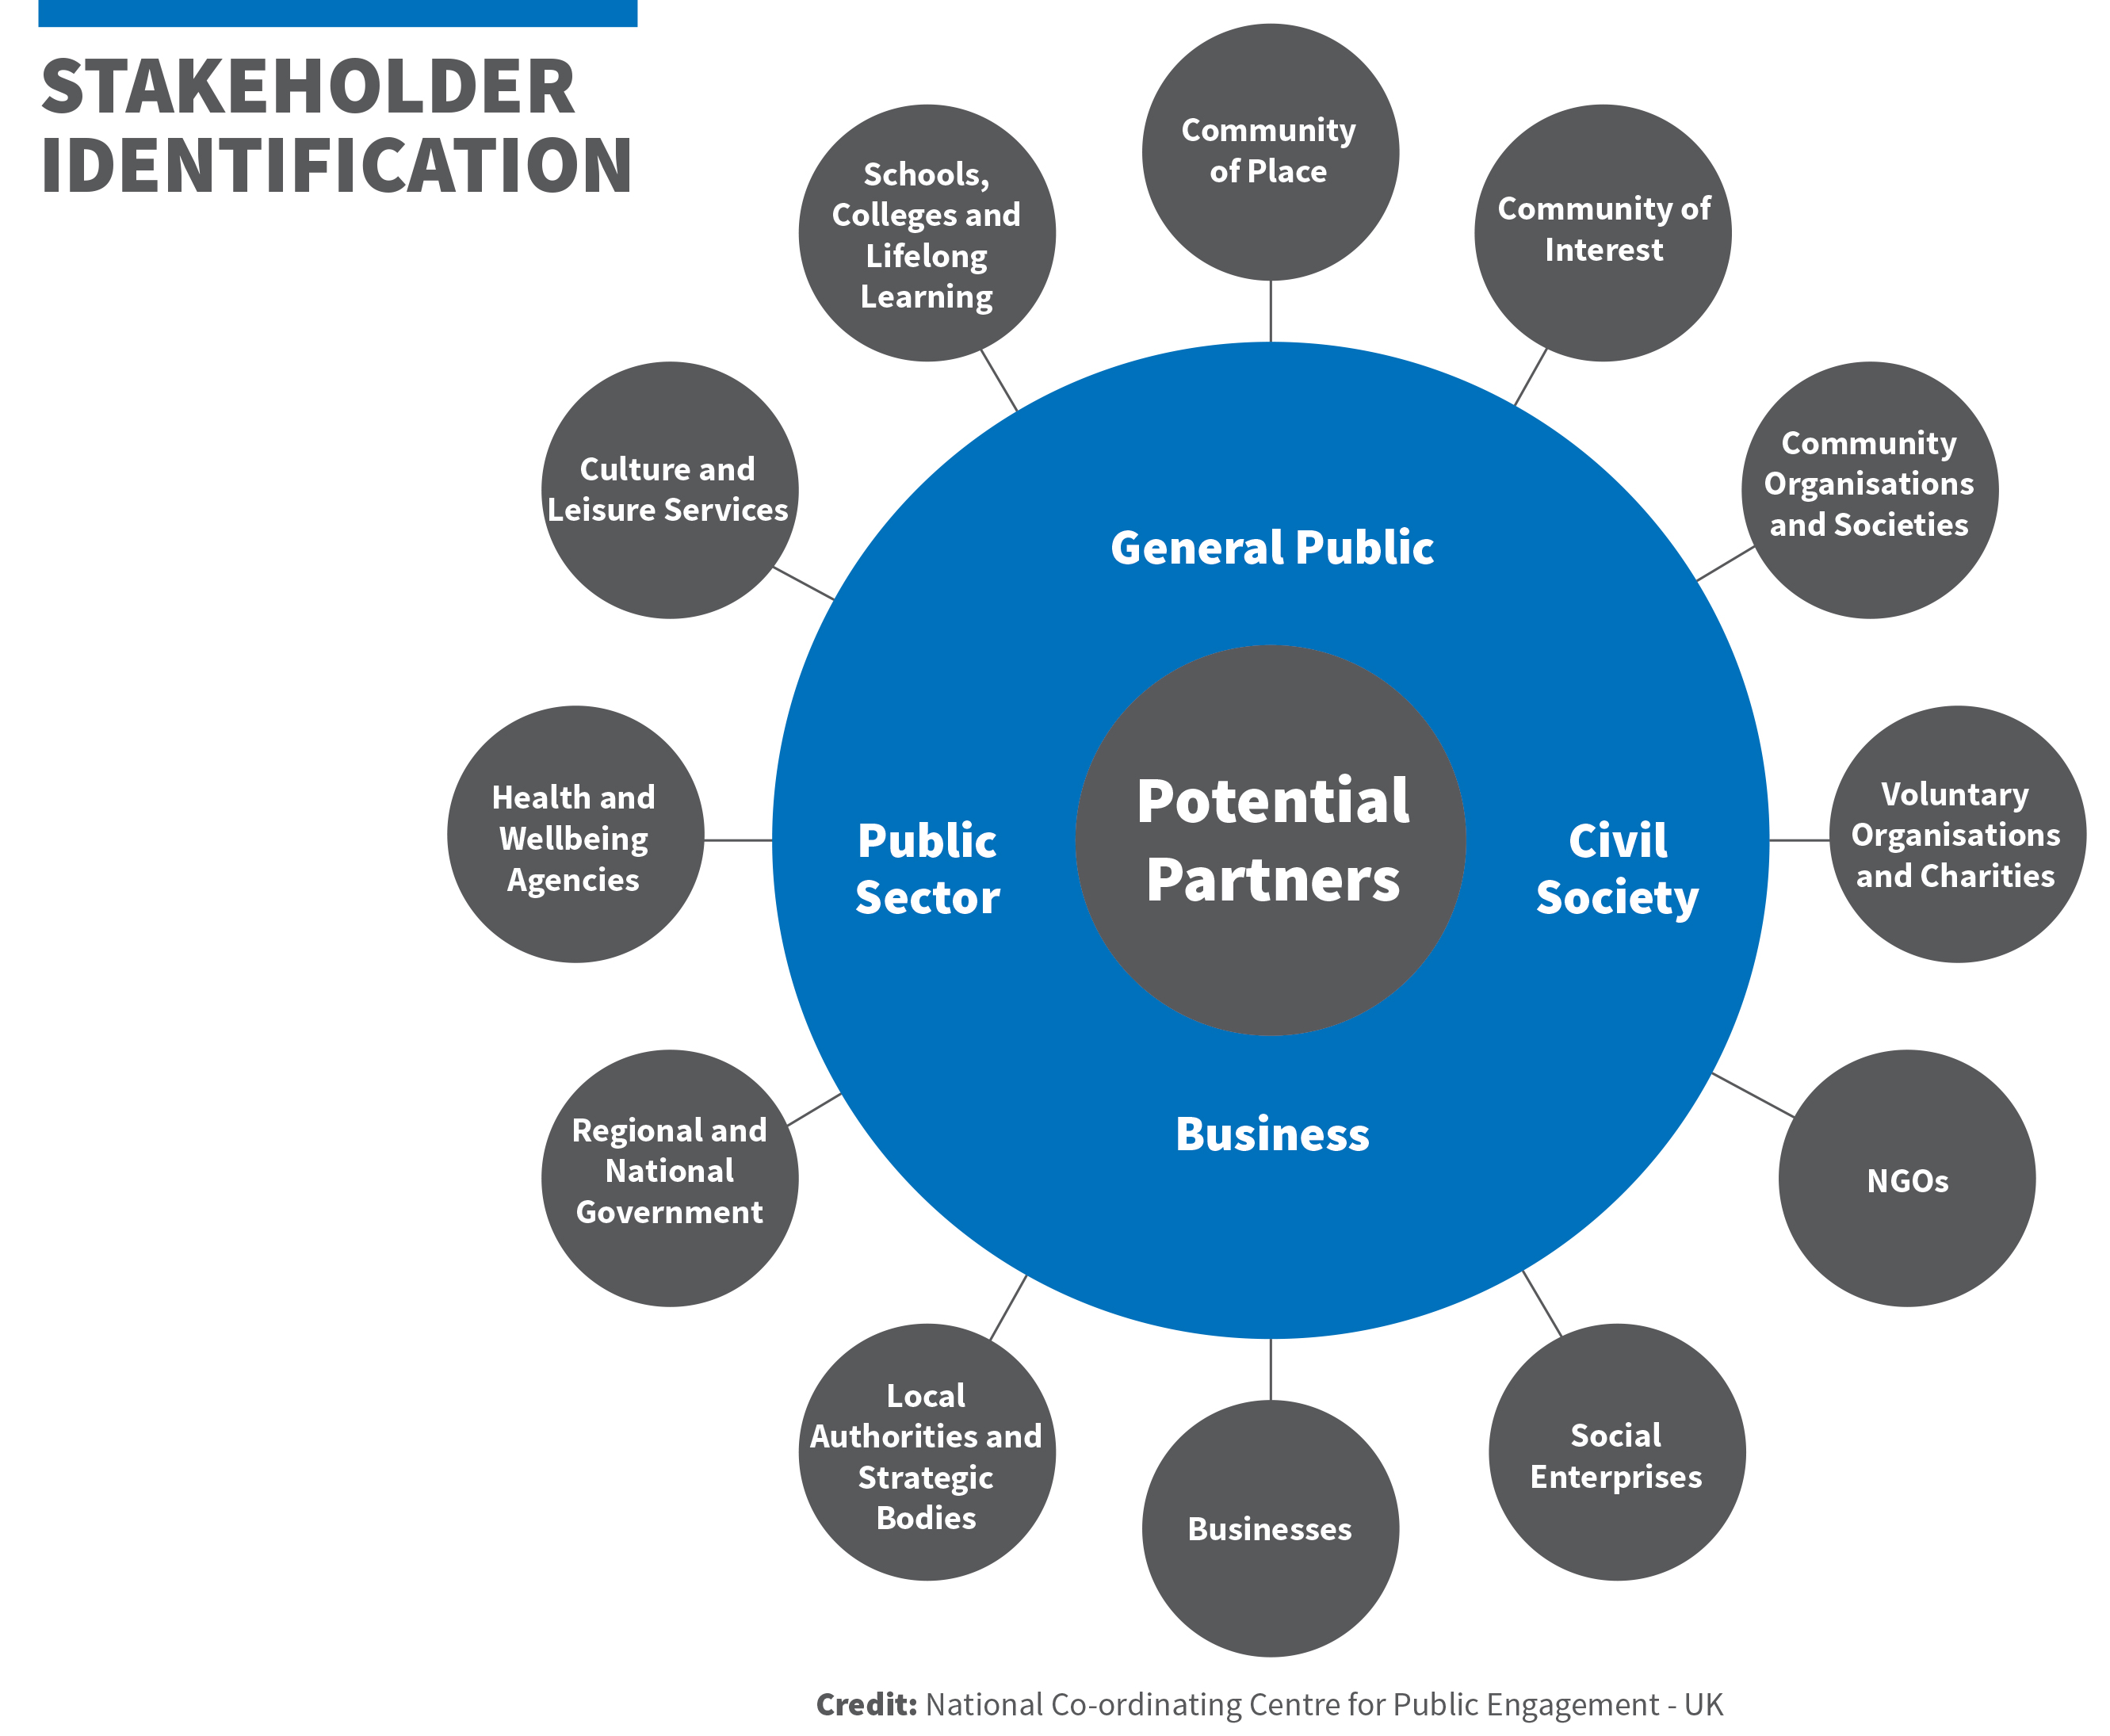 UK's National Centre for Public Engagement Diagram. Potential partners include four categories. General Public, Civil Society, Business and public sector. Included within these categories are the following. Community of Place, Community of interest, community of organisations and societies, voluntary organisations and charities, NGOs, Social Enterprieses, Businesses, Local authorities and stratgeic bodies, regional and national government, health and wellbeing agencies, culture and leisure services, shools colleges and lieflong learning, community of place.